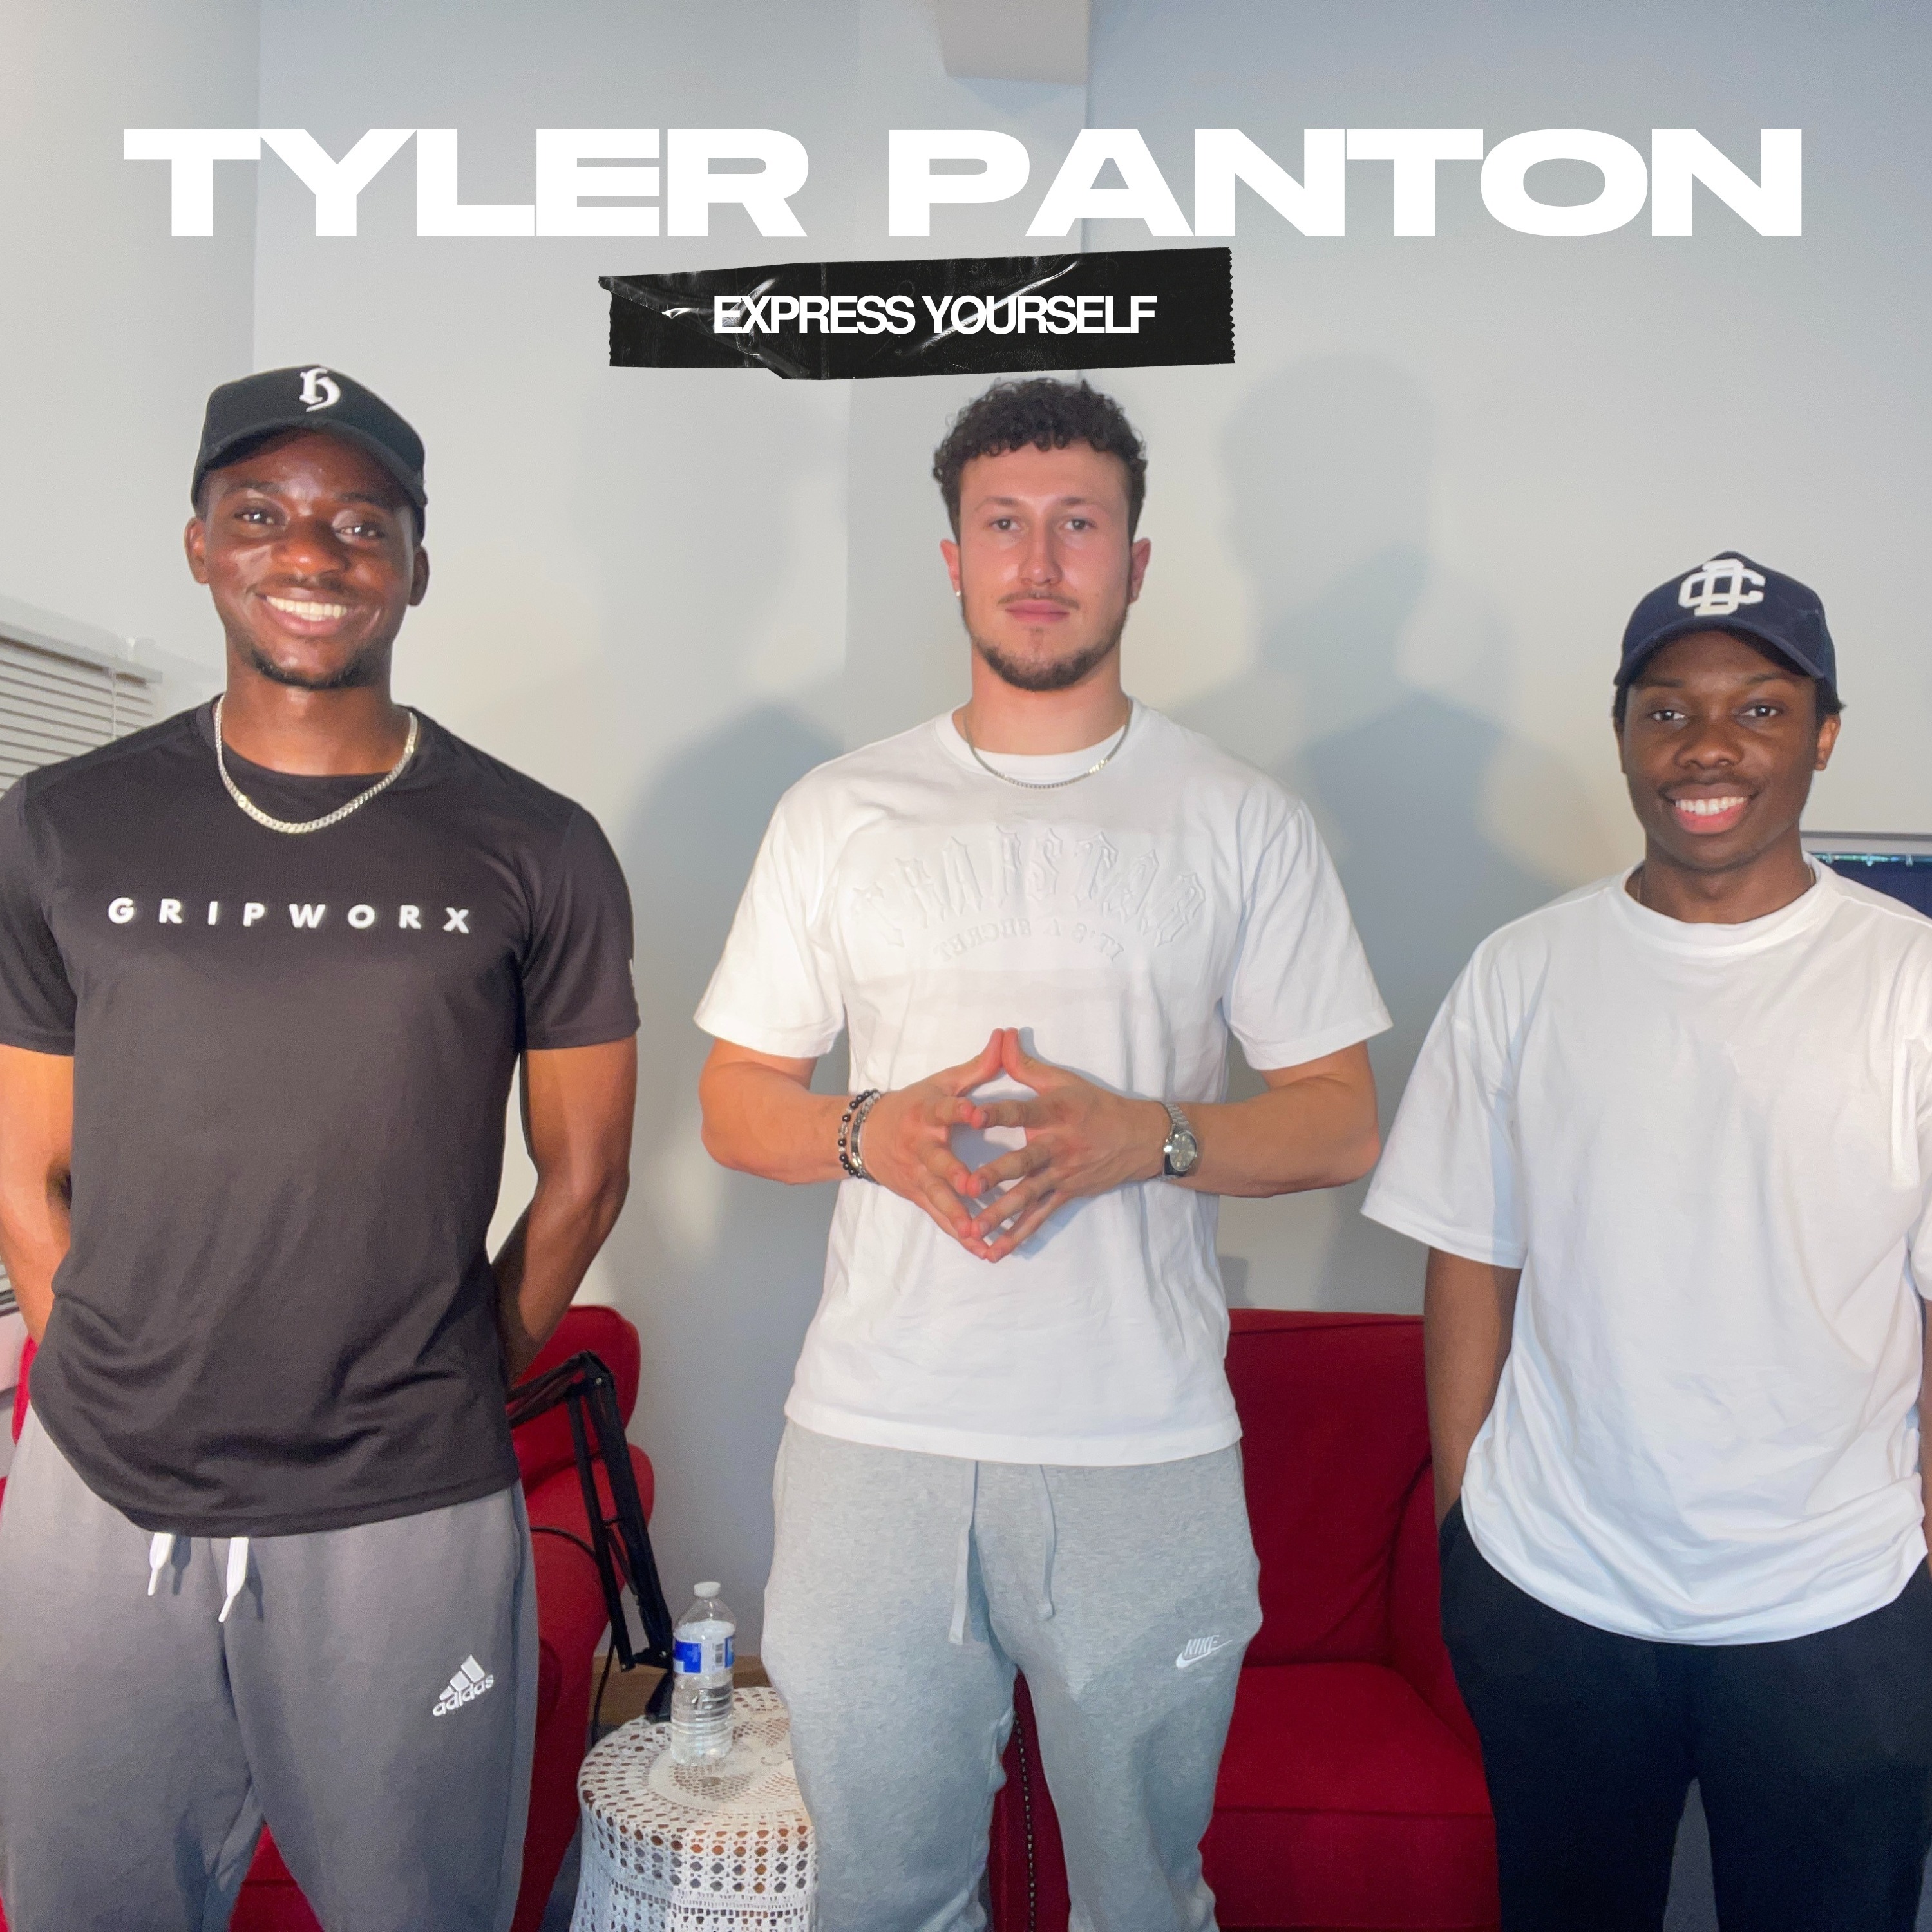 Tyler Panton on Being an Example, Expressing Yourself & THAT Celebration // Get To Know // S2E3